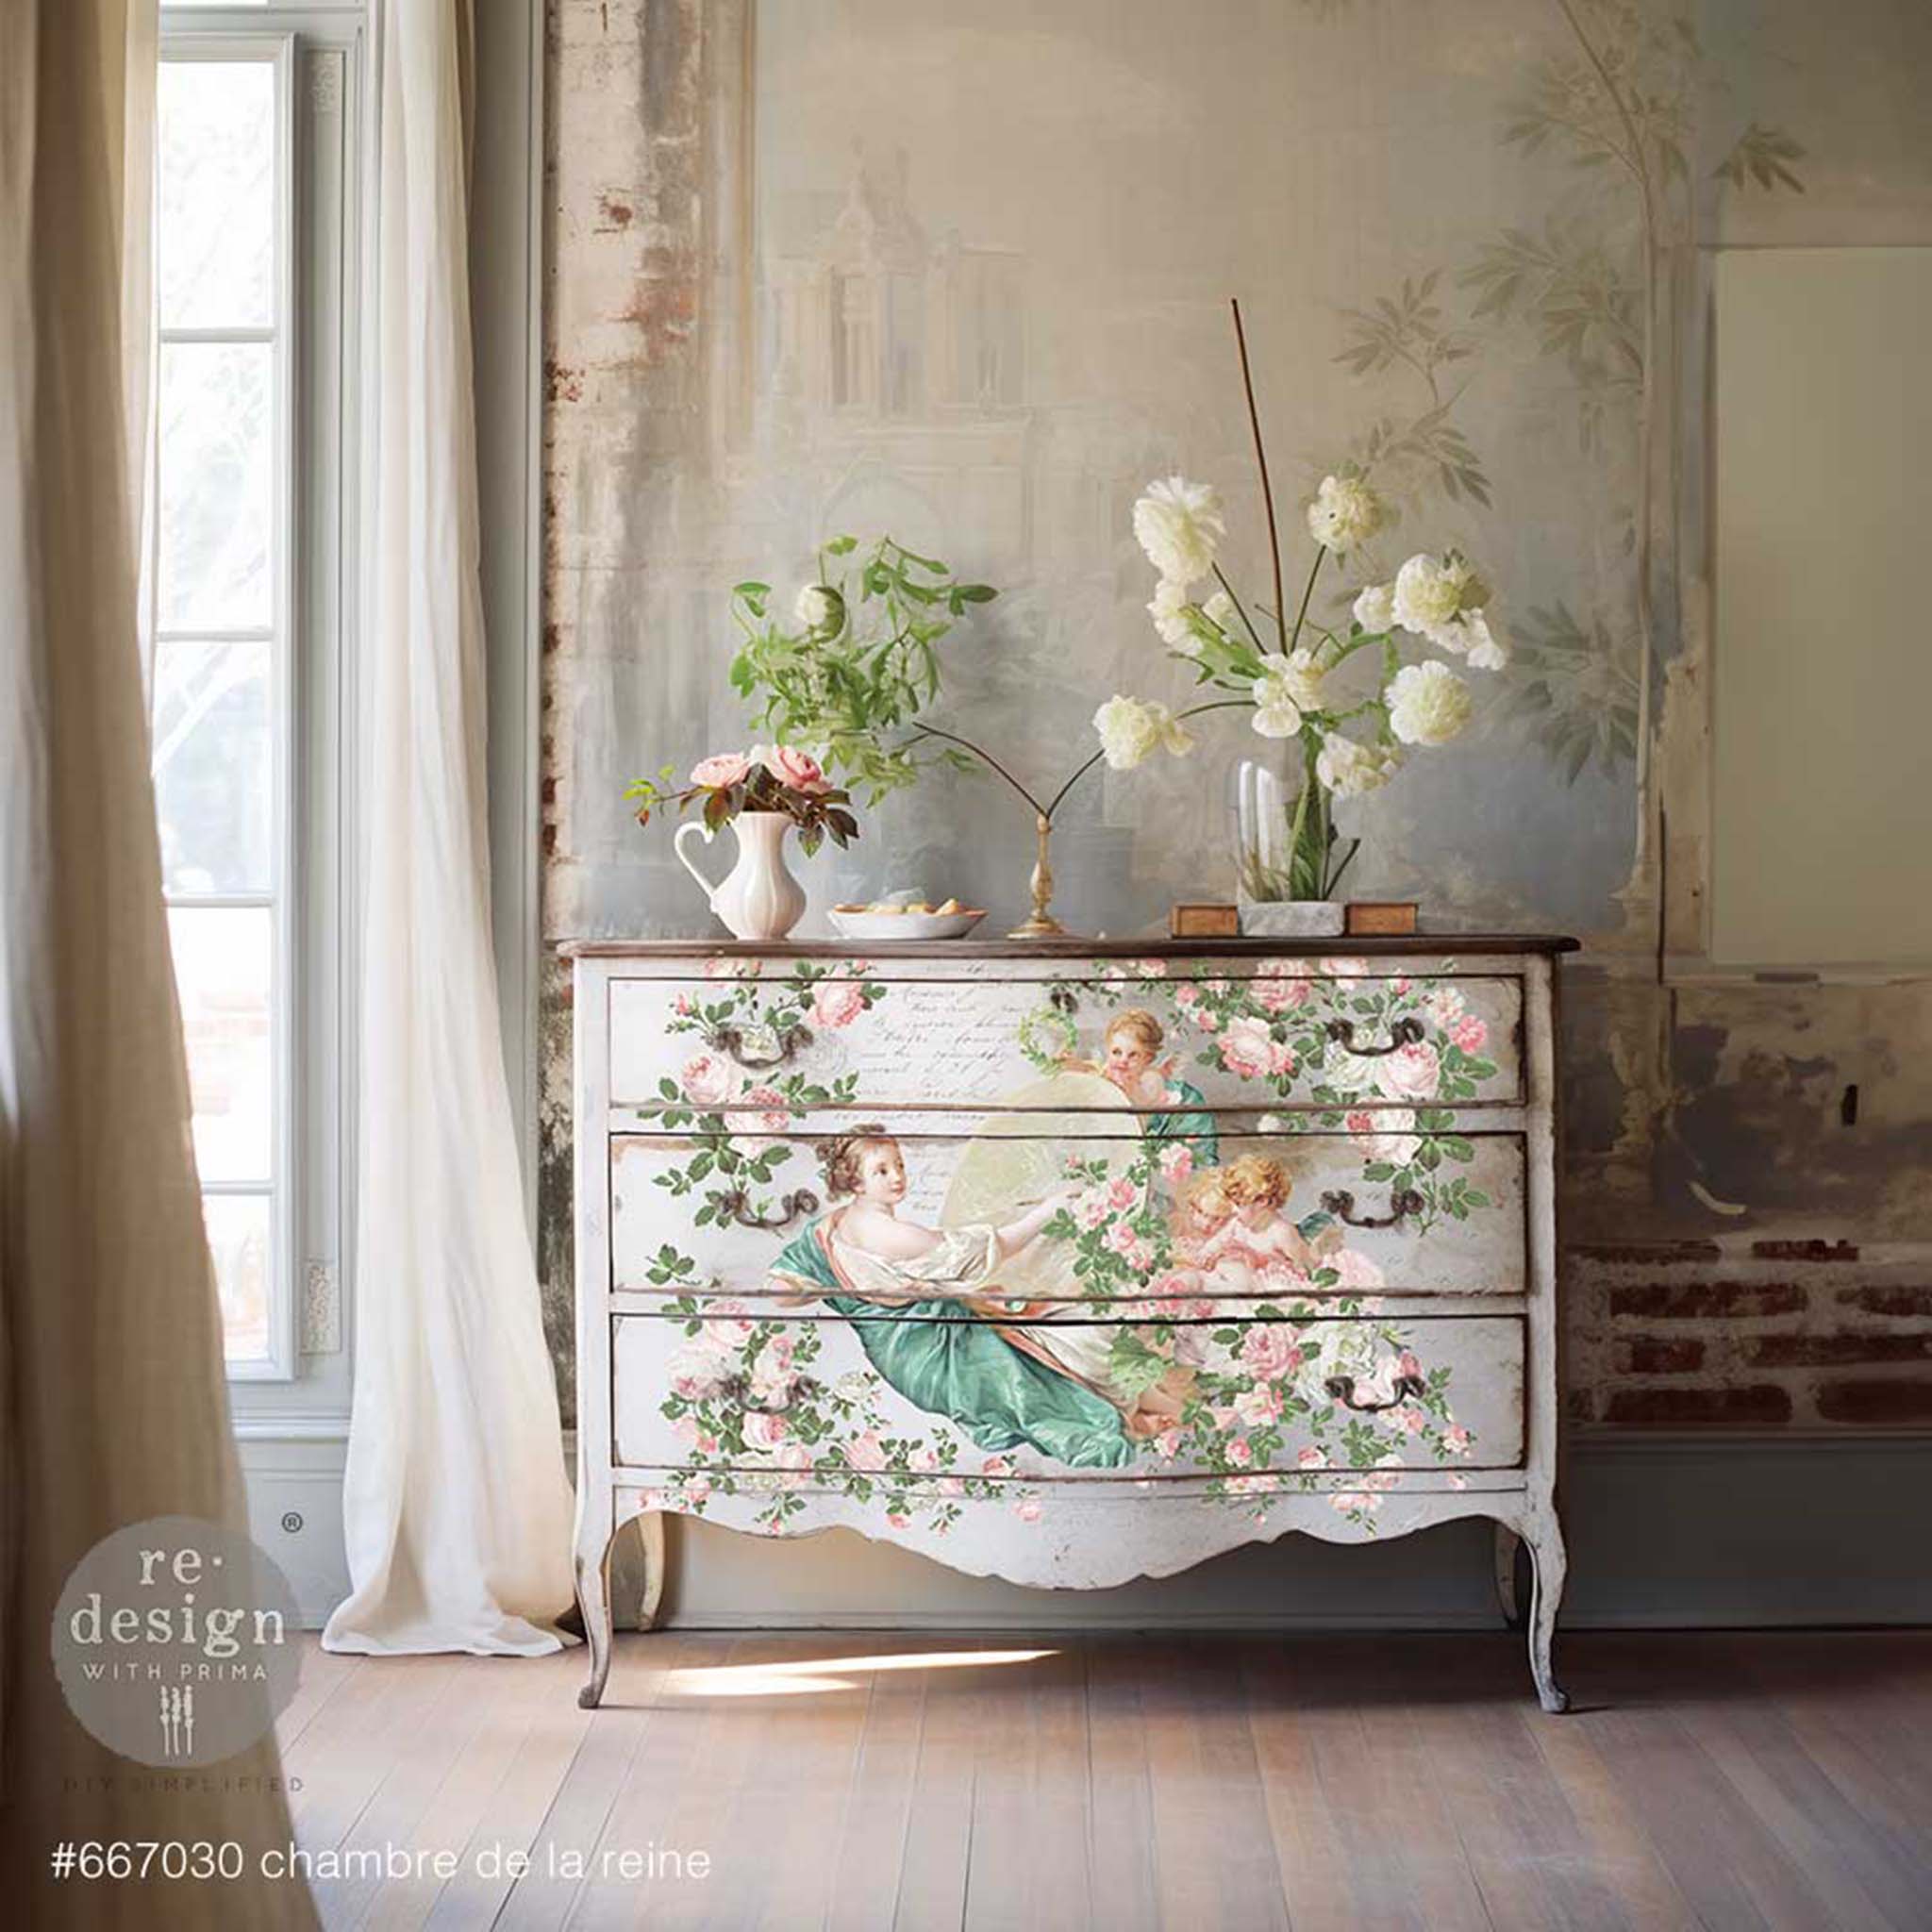 A vintage 3-drawer dresser is painted white and features ReDesign with Prima's Chambre De La Reine rub-on transfer on the drawers.